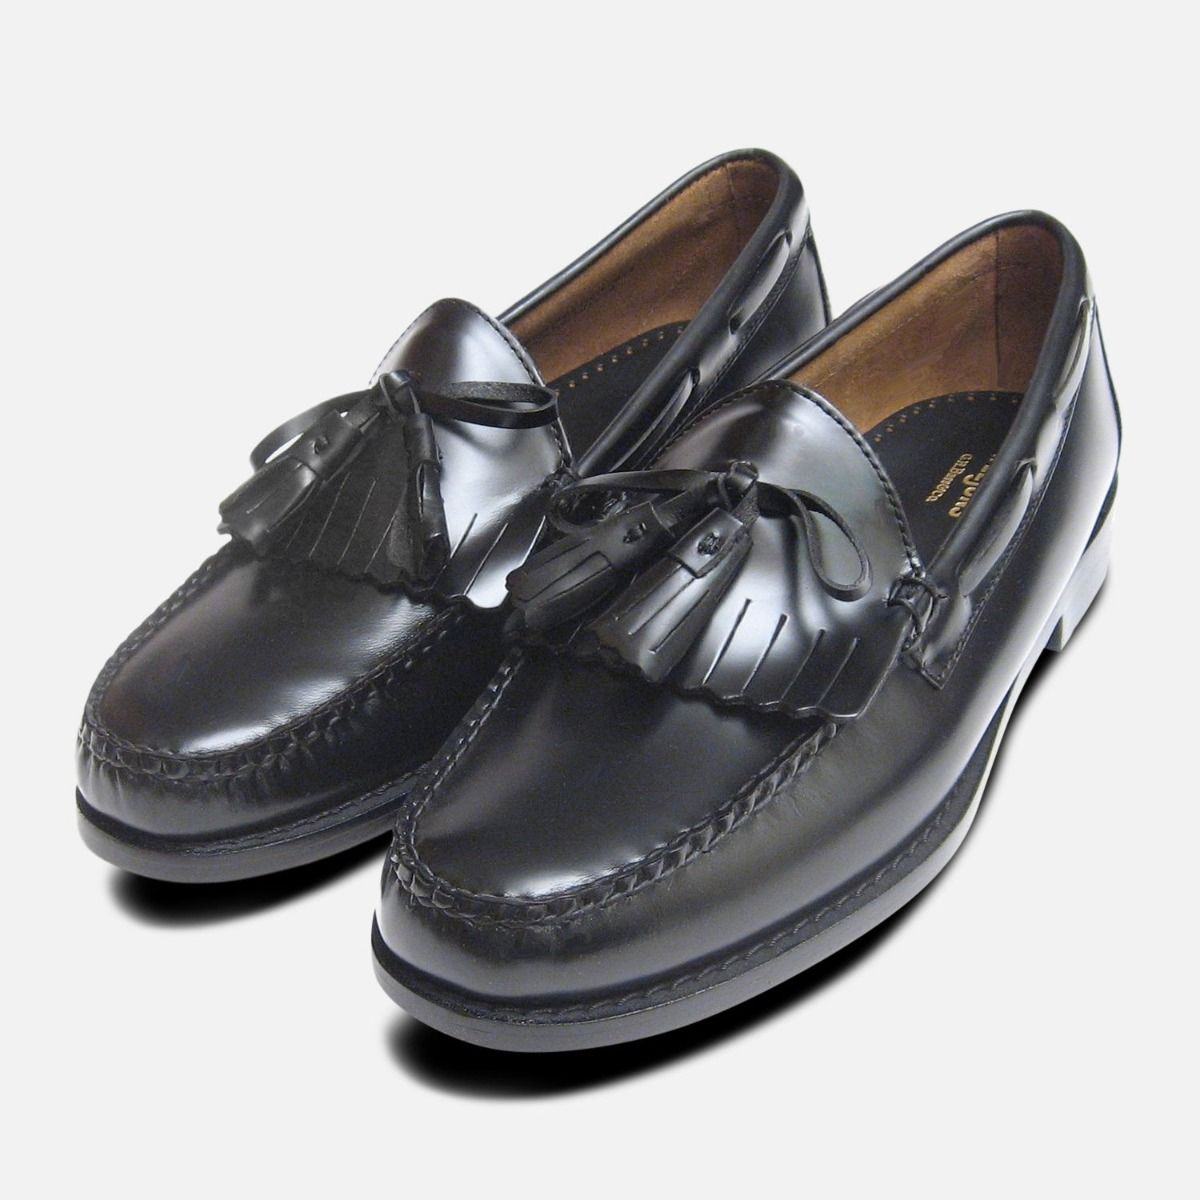 Mens Black Polished & Tassel Loafers by Bass Weejuns